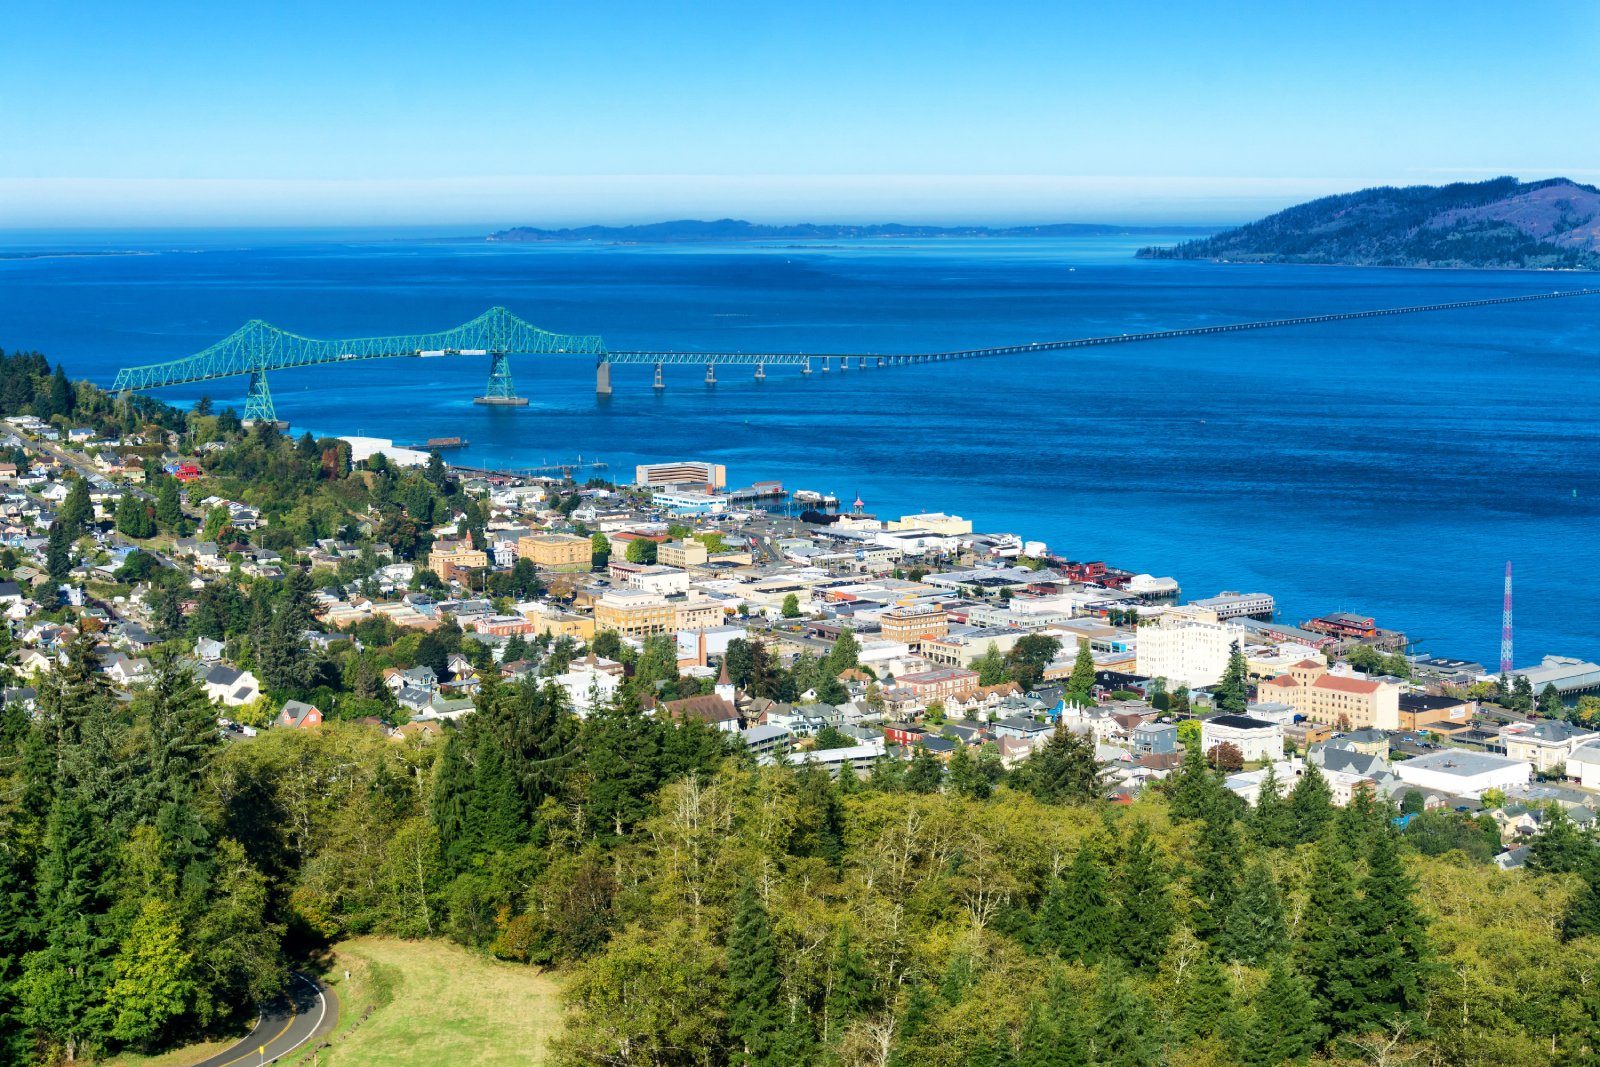 <p class="wp-caption-text">Image Credit: Shutterstock / Jess Kraft</p>  <p><span>Astoria’s rich history and stunning Pacific views make it a must-visit. Explore maritime museums, climb the Astoria Column, and savor locally brewed beers in this historic town.</span></p>